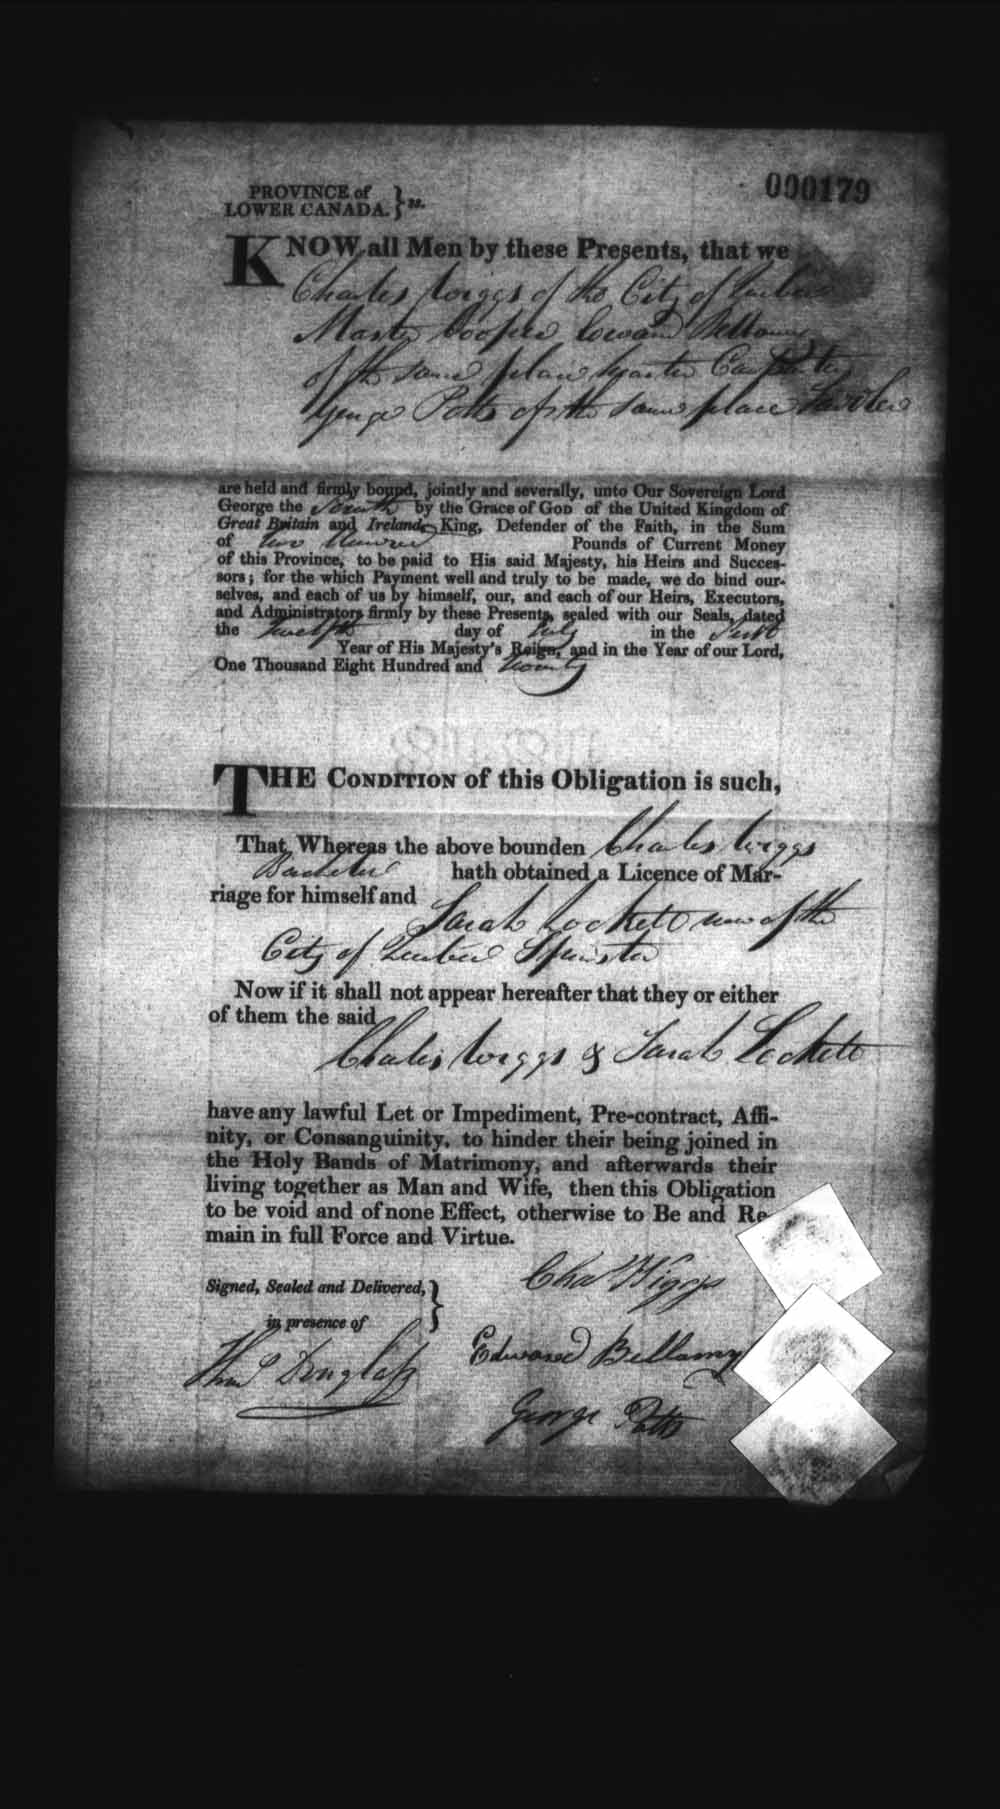 Digitized page of Upper and Lower Canada Marriage Bonds (1779-1865) for Image No.: e008236027